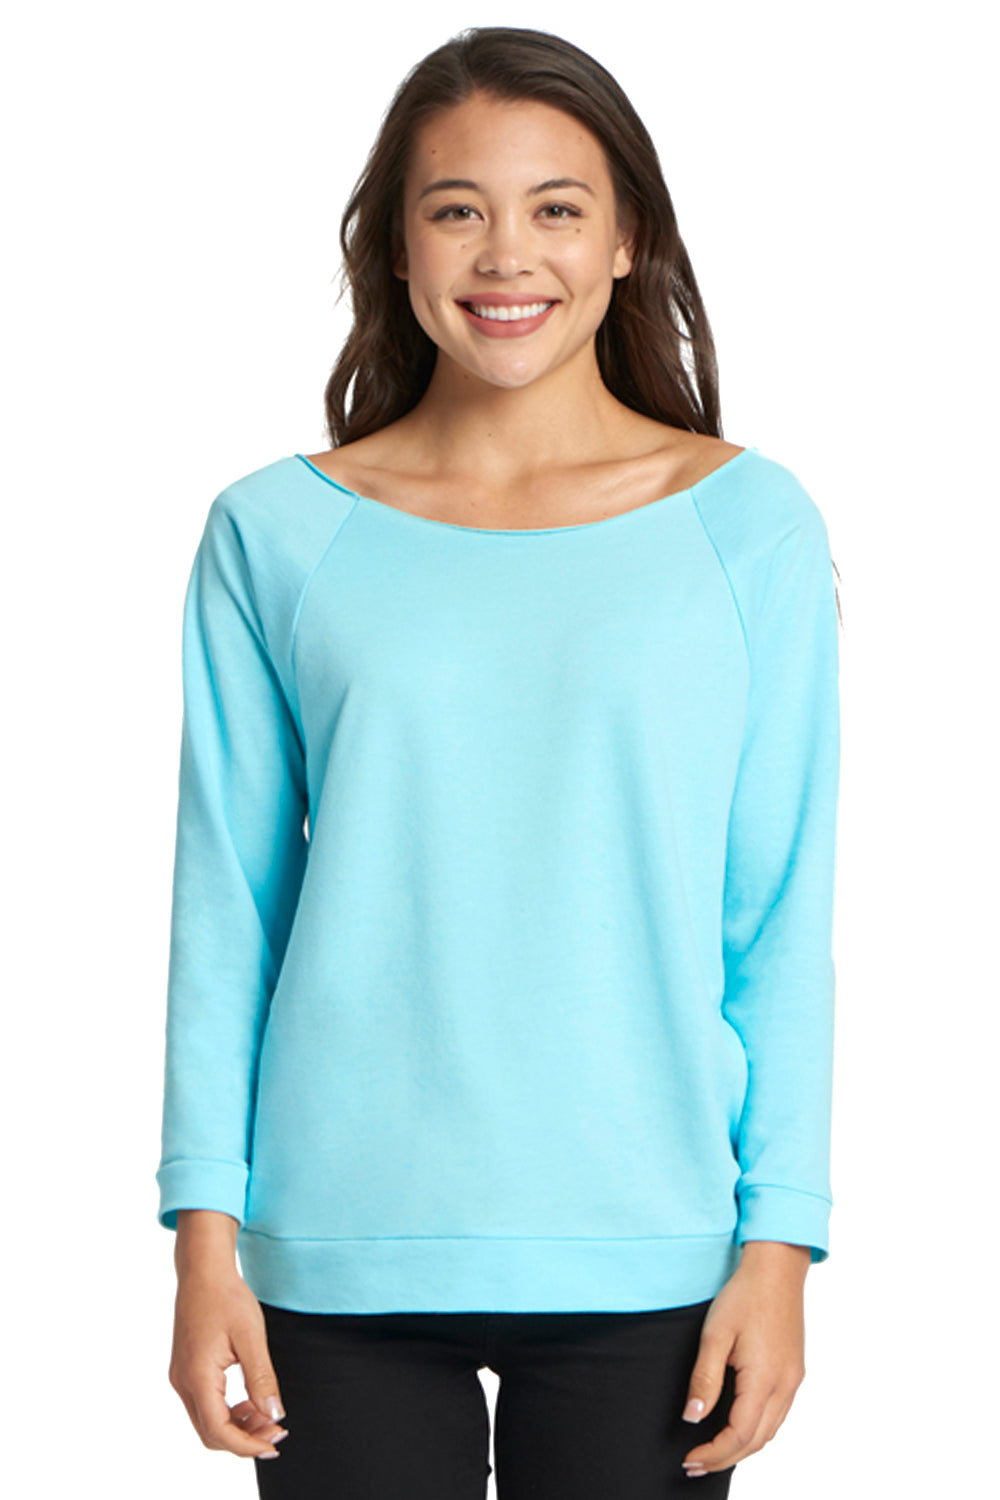 Next Level 6951 French Terry 3/4 Sleeve Wide Neck T-Shirt Cancun Blue Front